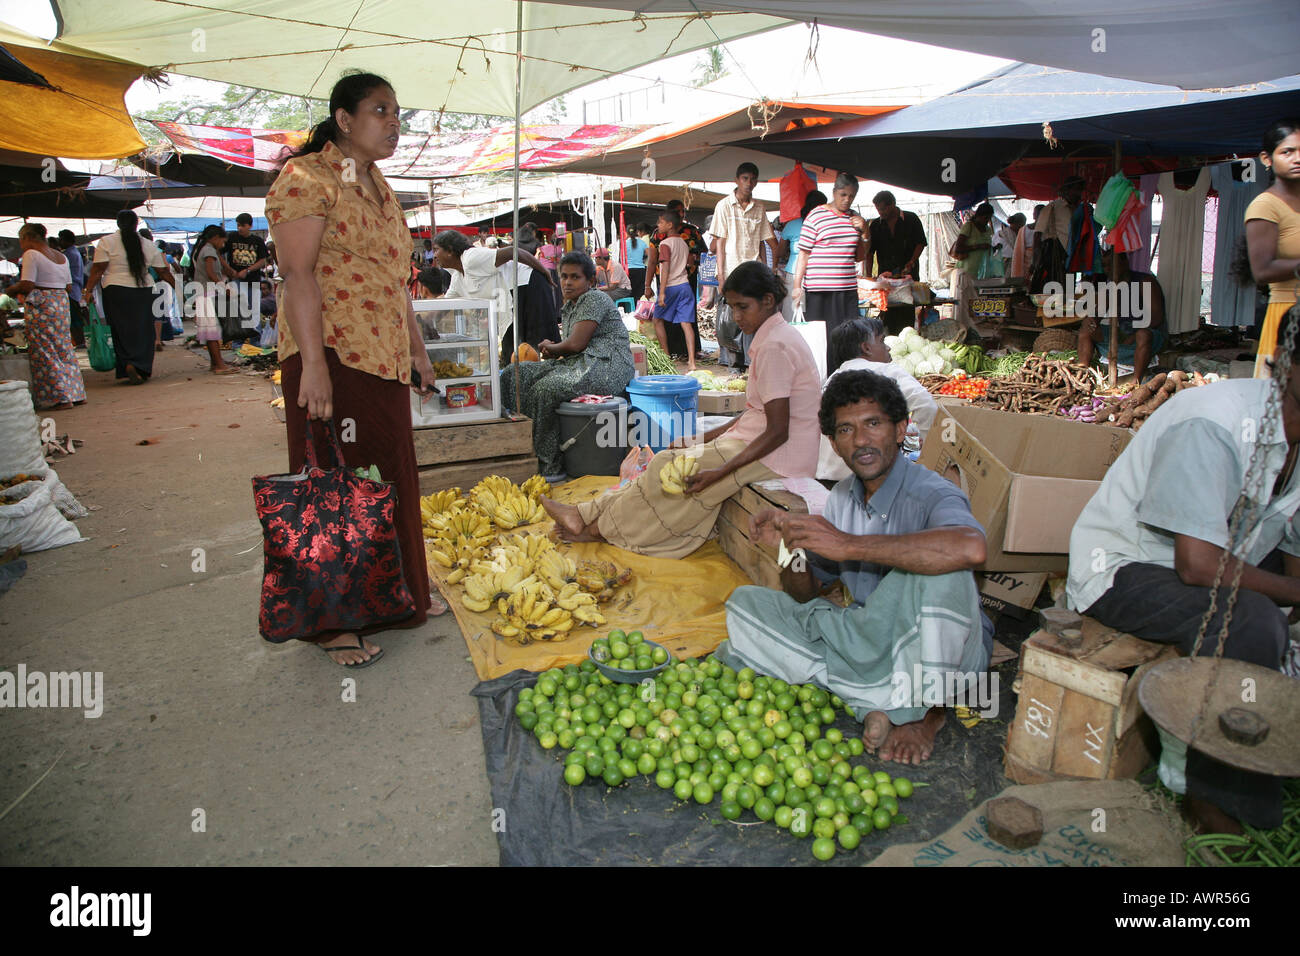 Man selling fruits and vegetables at the market in Tangalle, Sri Lanka, Asia Stock Photo